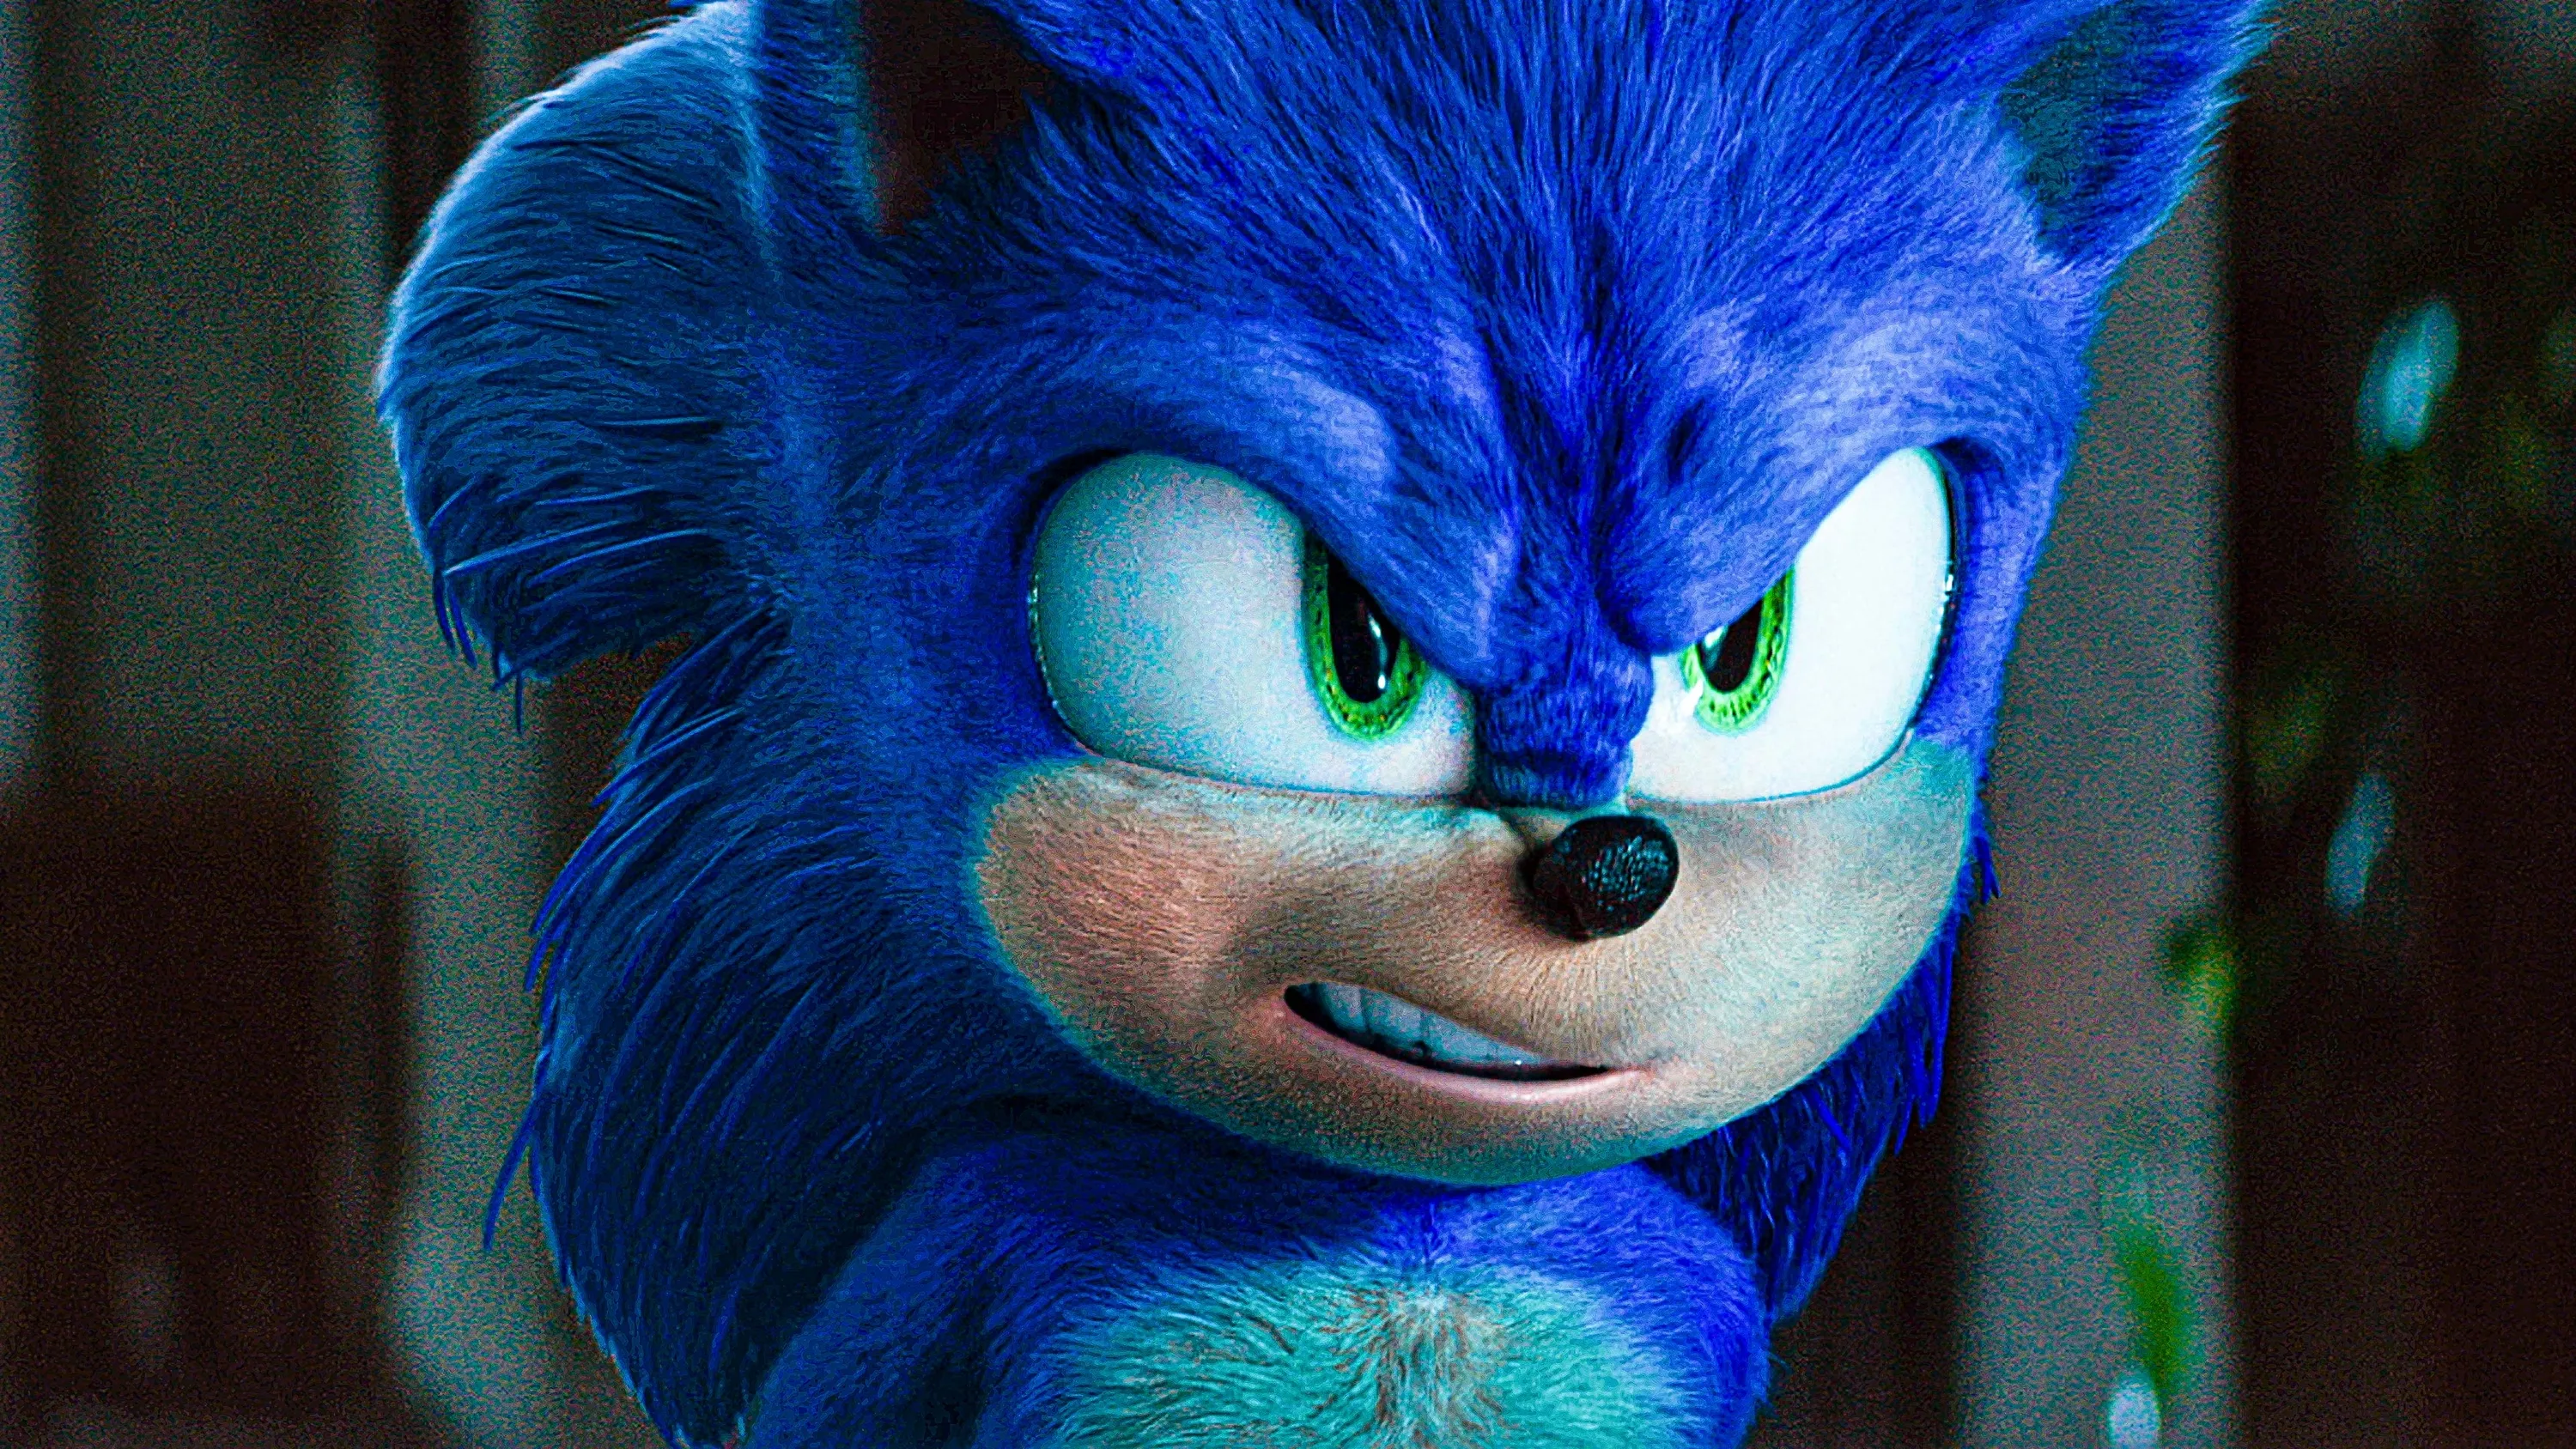 Sonic the Hedgehog 3 Filming Start Date Revealed